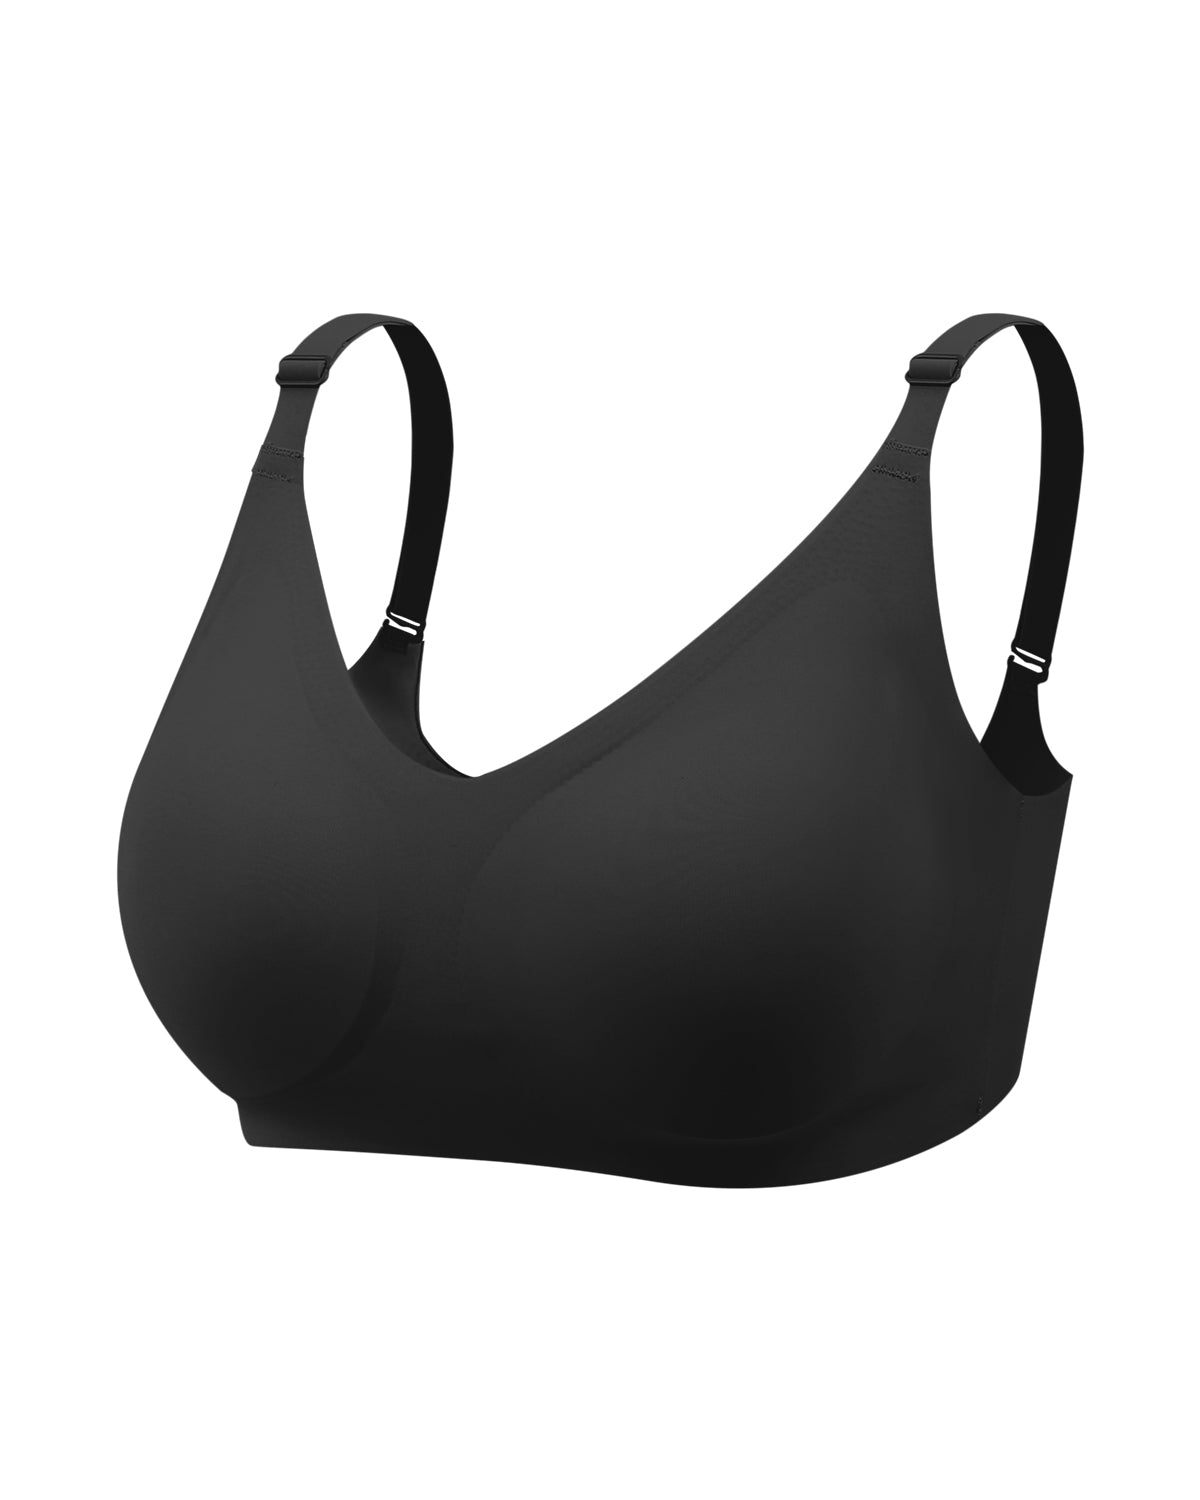 opvise Women Bra See-through Mesh Back Closure Striped Spaghetti Strap  Breast Support Padded U-shaped Back Brassiere Inner Wear Clothes Black M